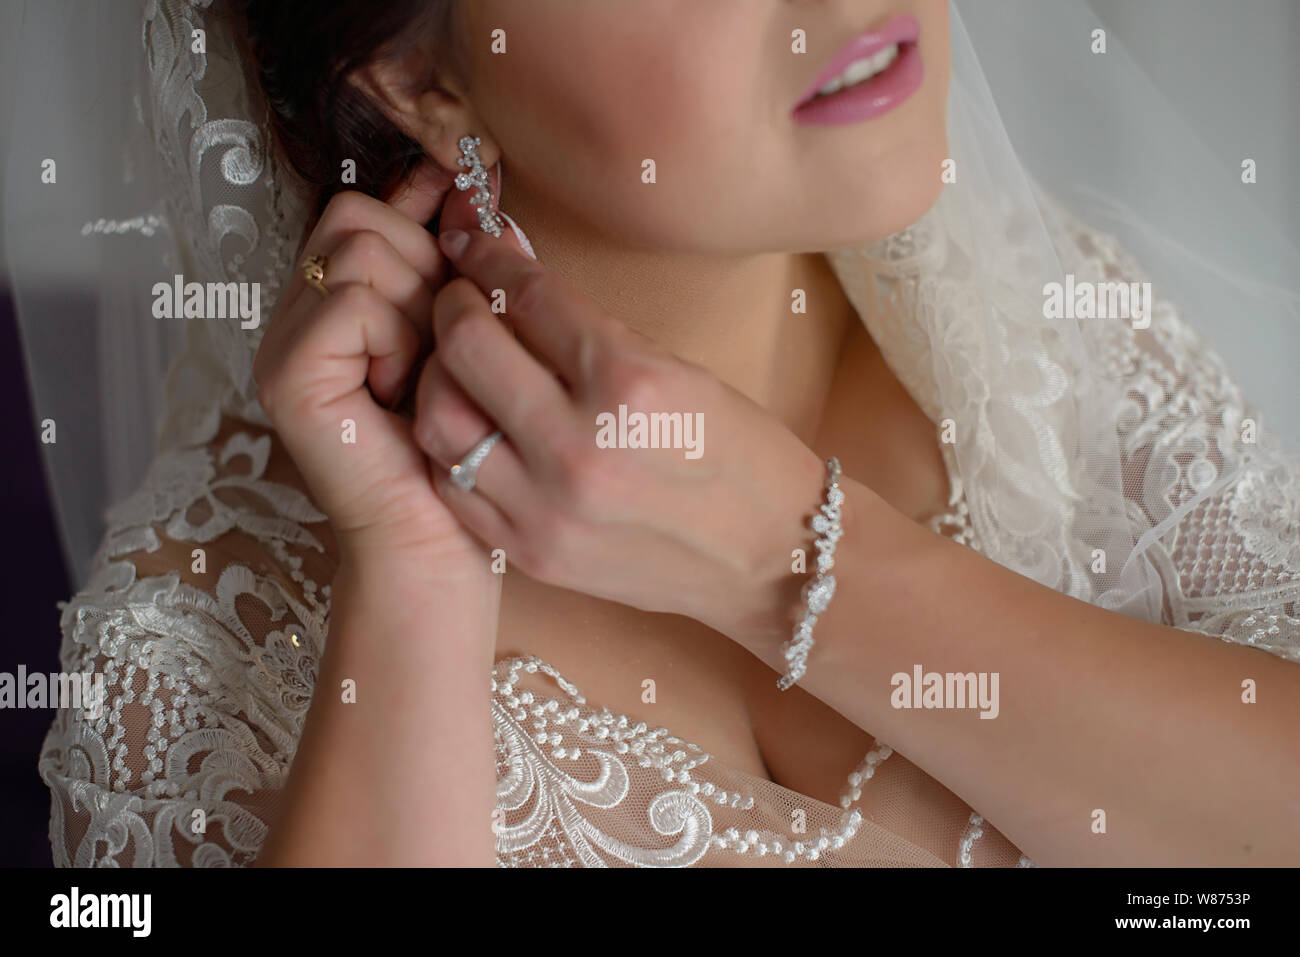 Beautiful bride in white lace wedding dress and embroidered veil wearing vintage diamond jewelry and adjusting earring clasp, getting ready Stock Photo